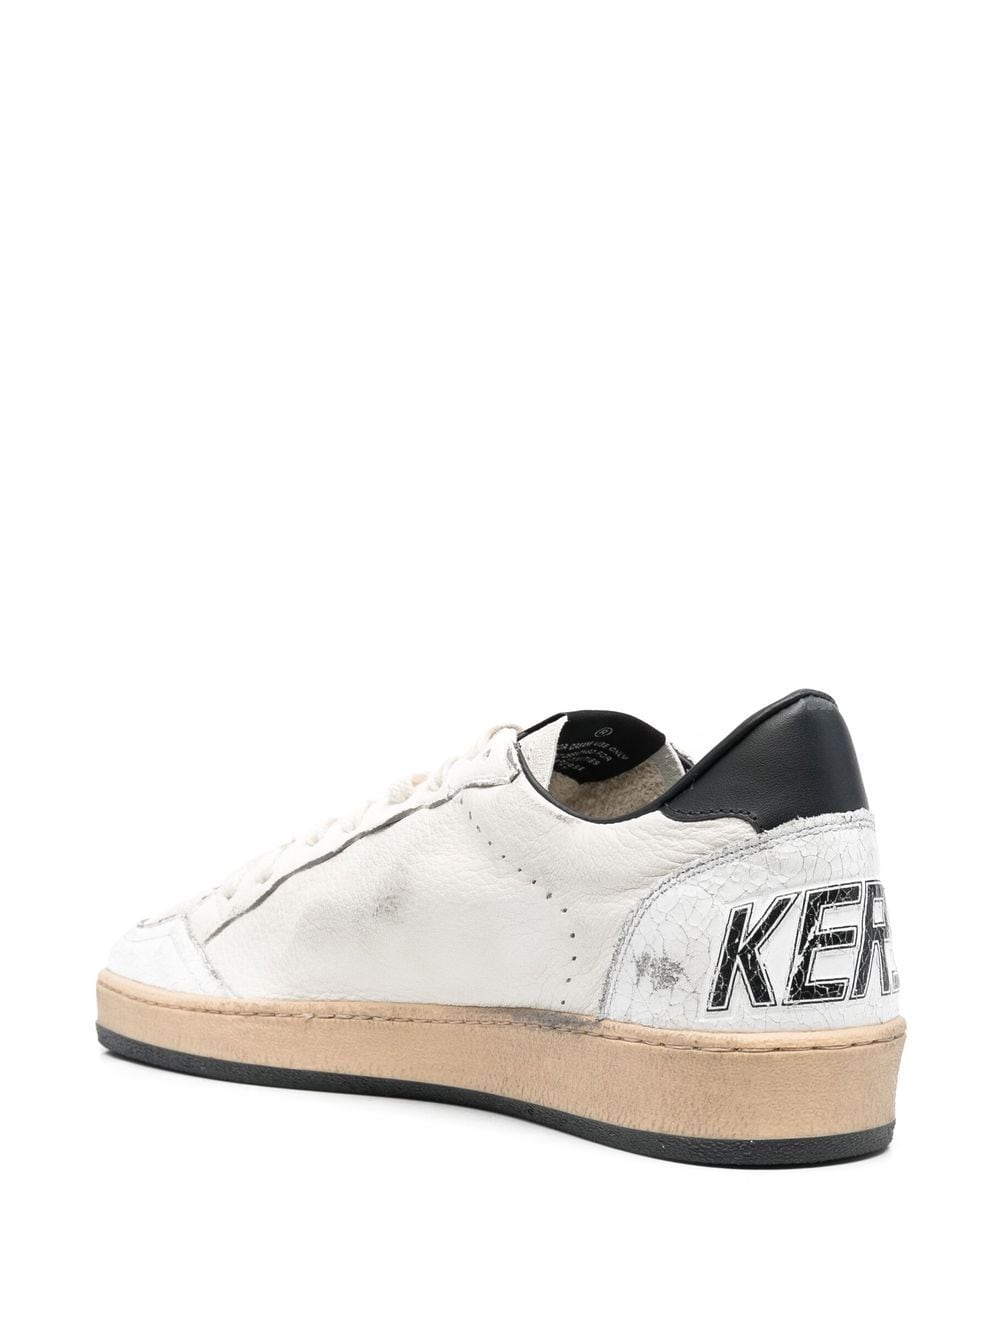 Ball-Star low-top leather sneakers